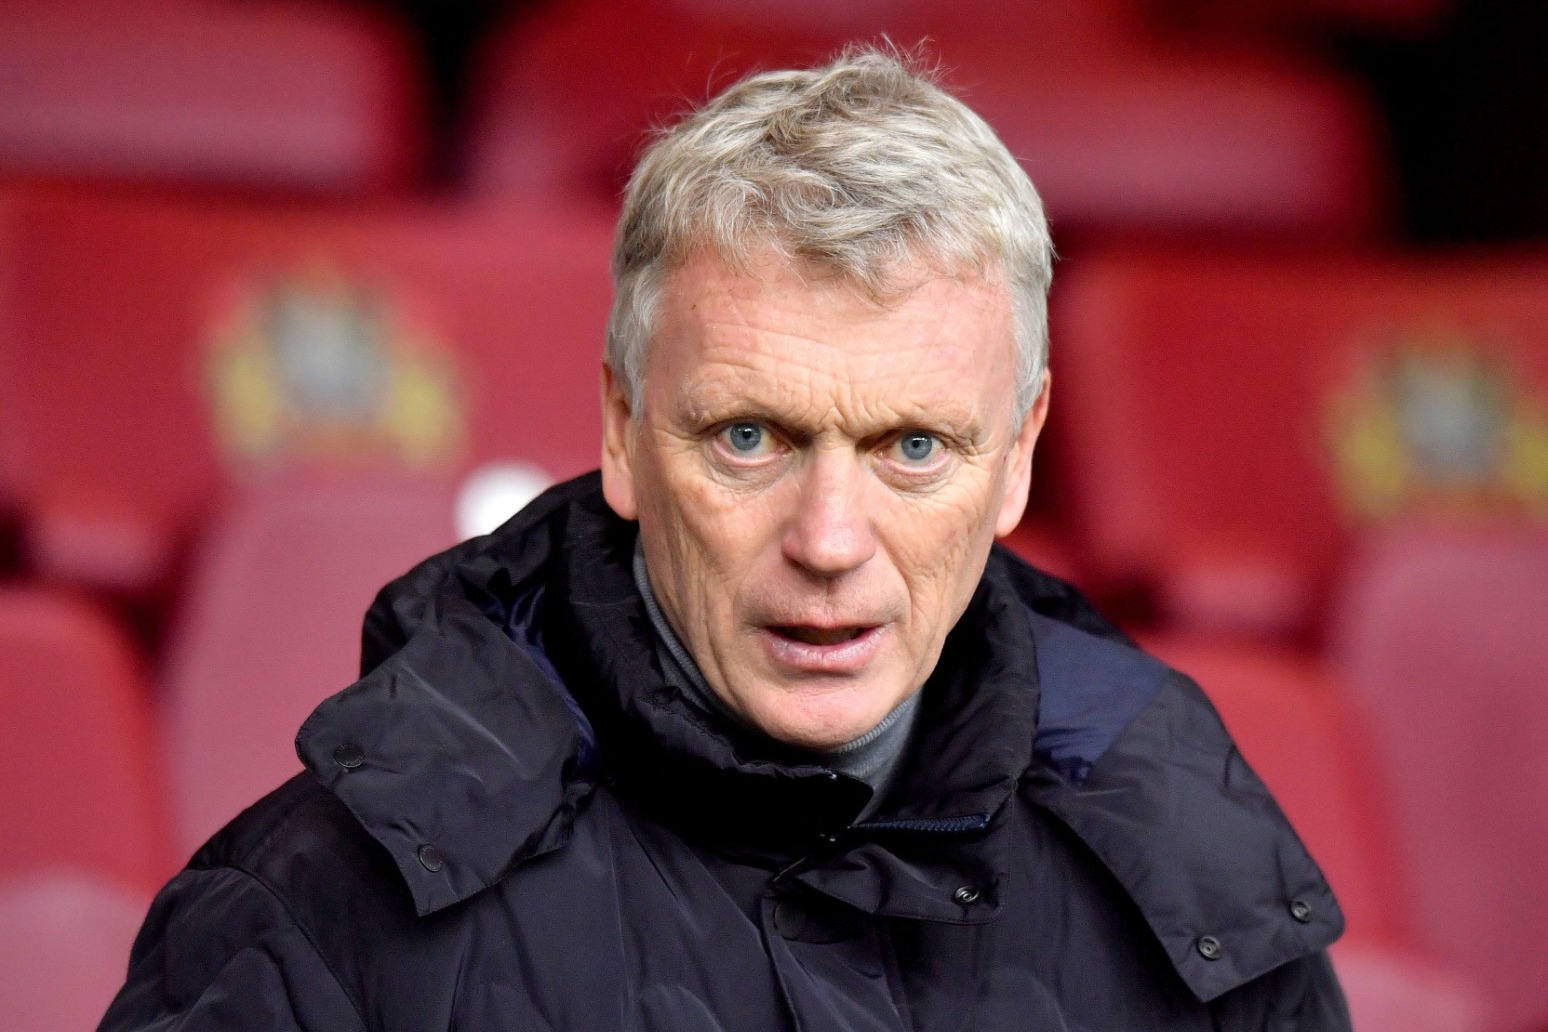 DAVID MOYES RETURNS TO WEST HAM AS MANAGER 